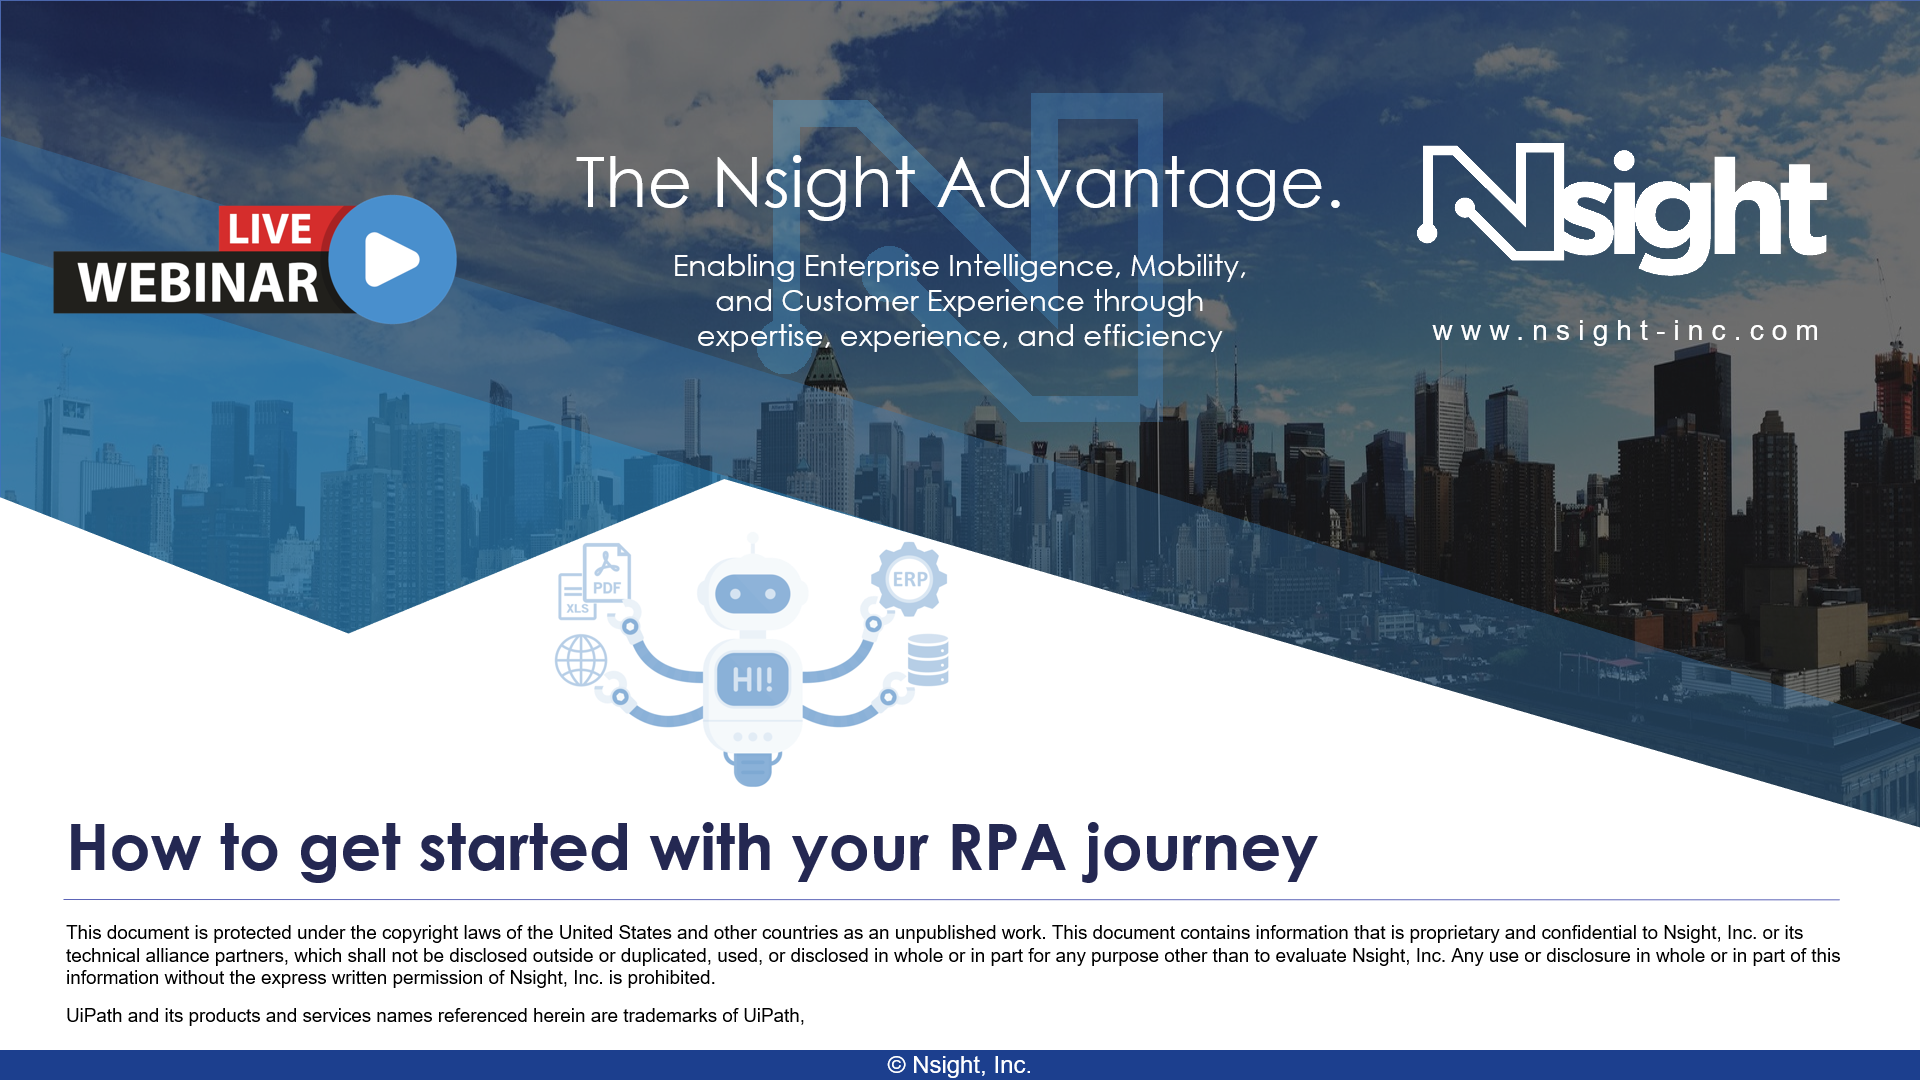 How to get started with your RPA journey